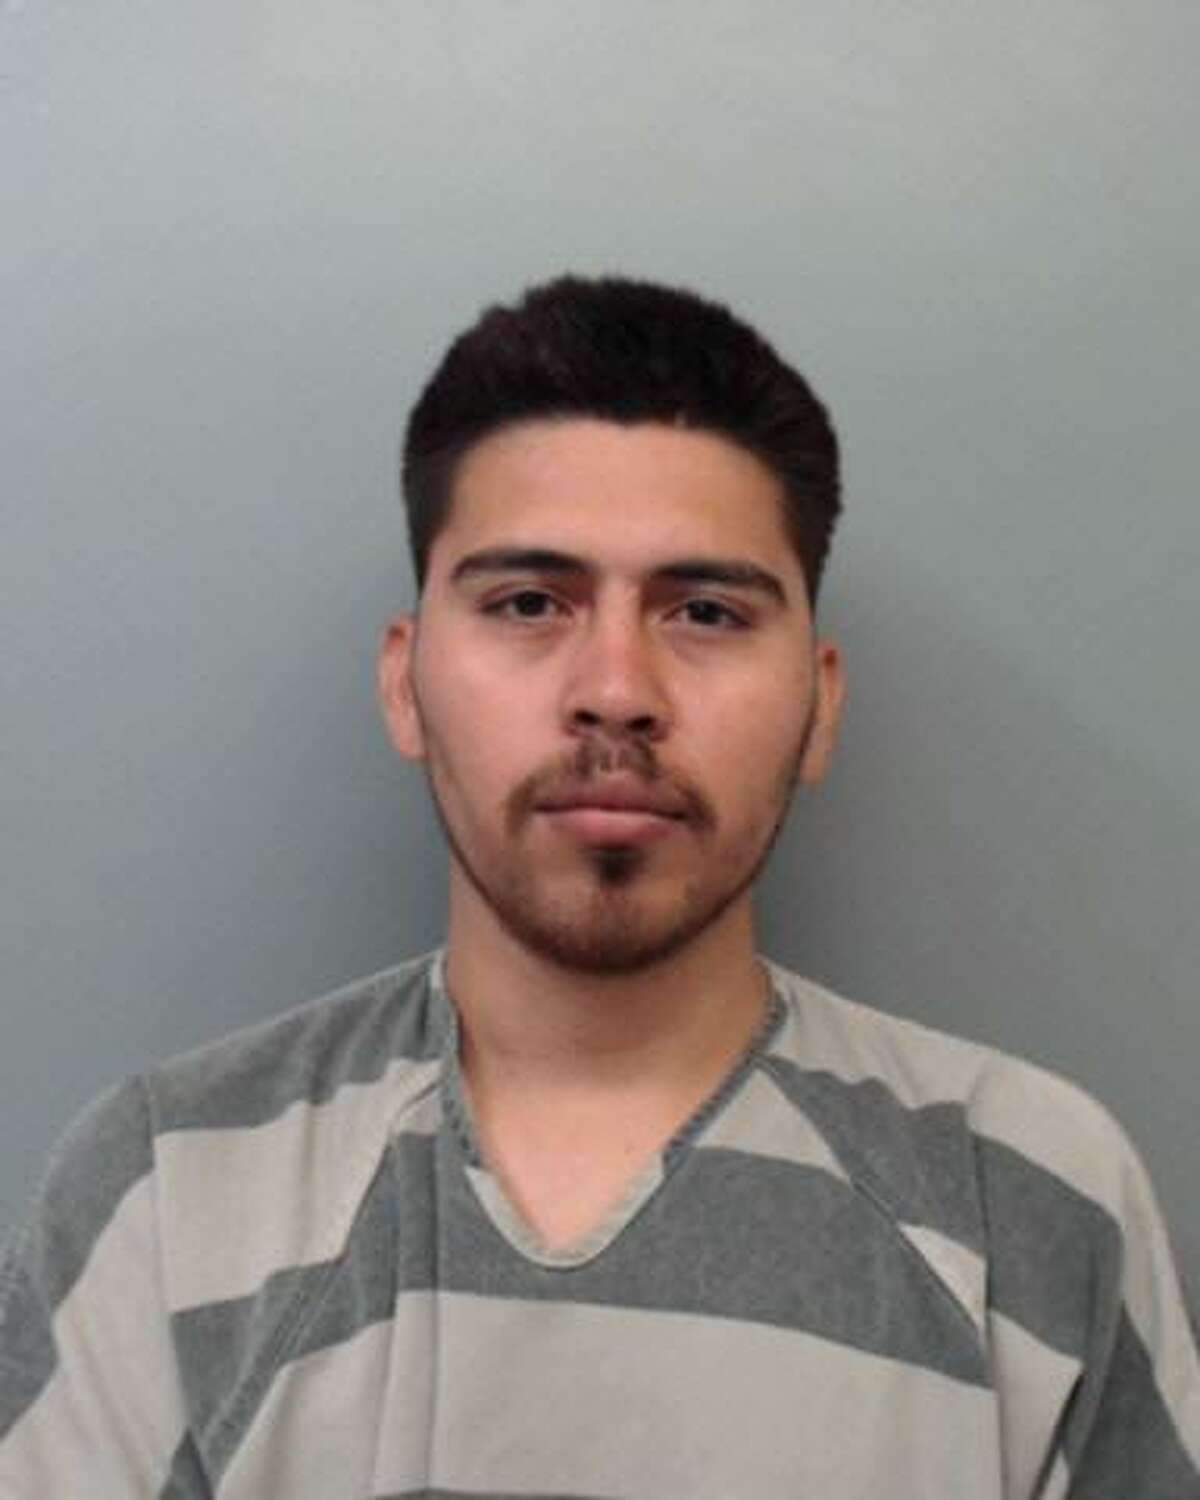 Oscar Calderon Rodriguez, 23, was charged with theft.